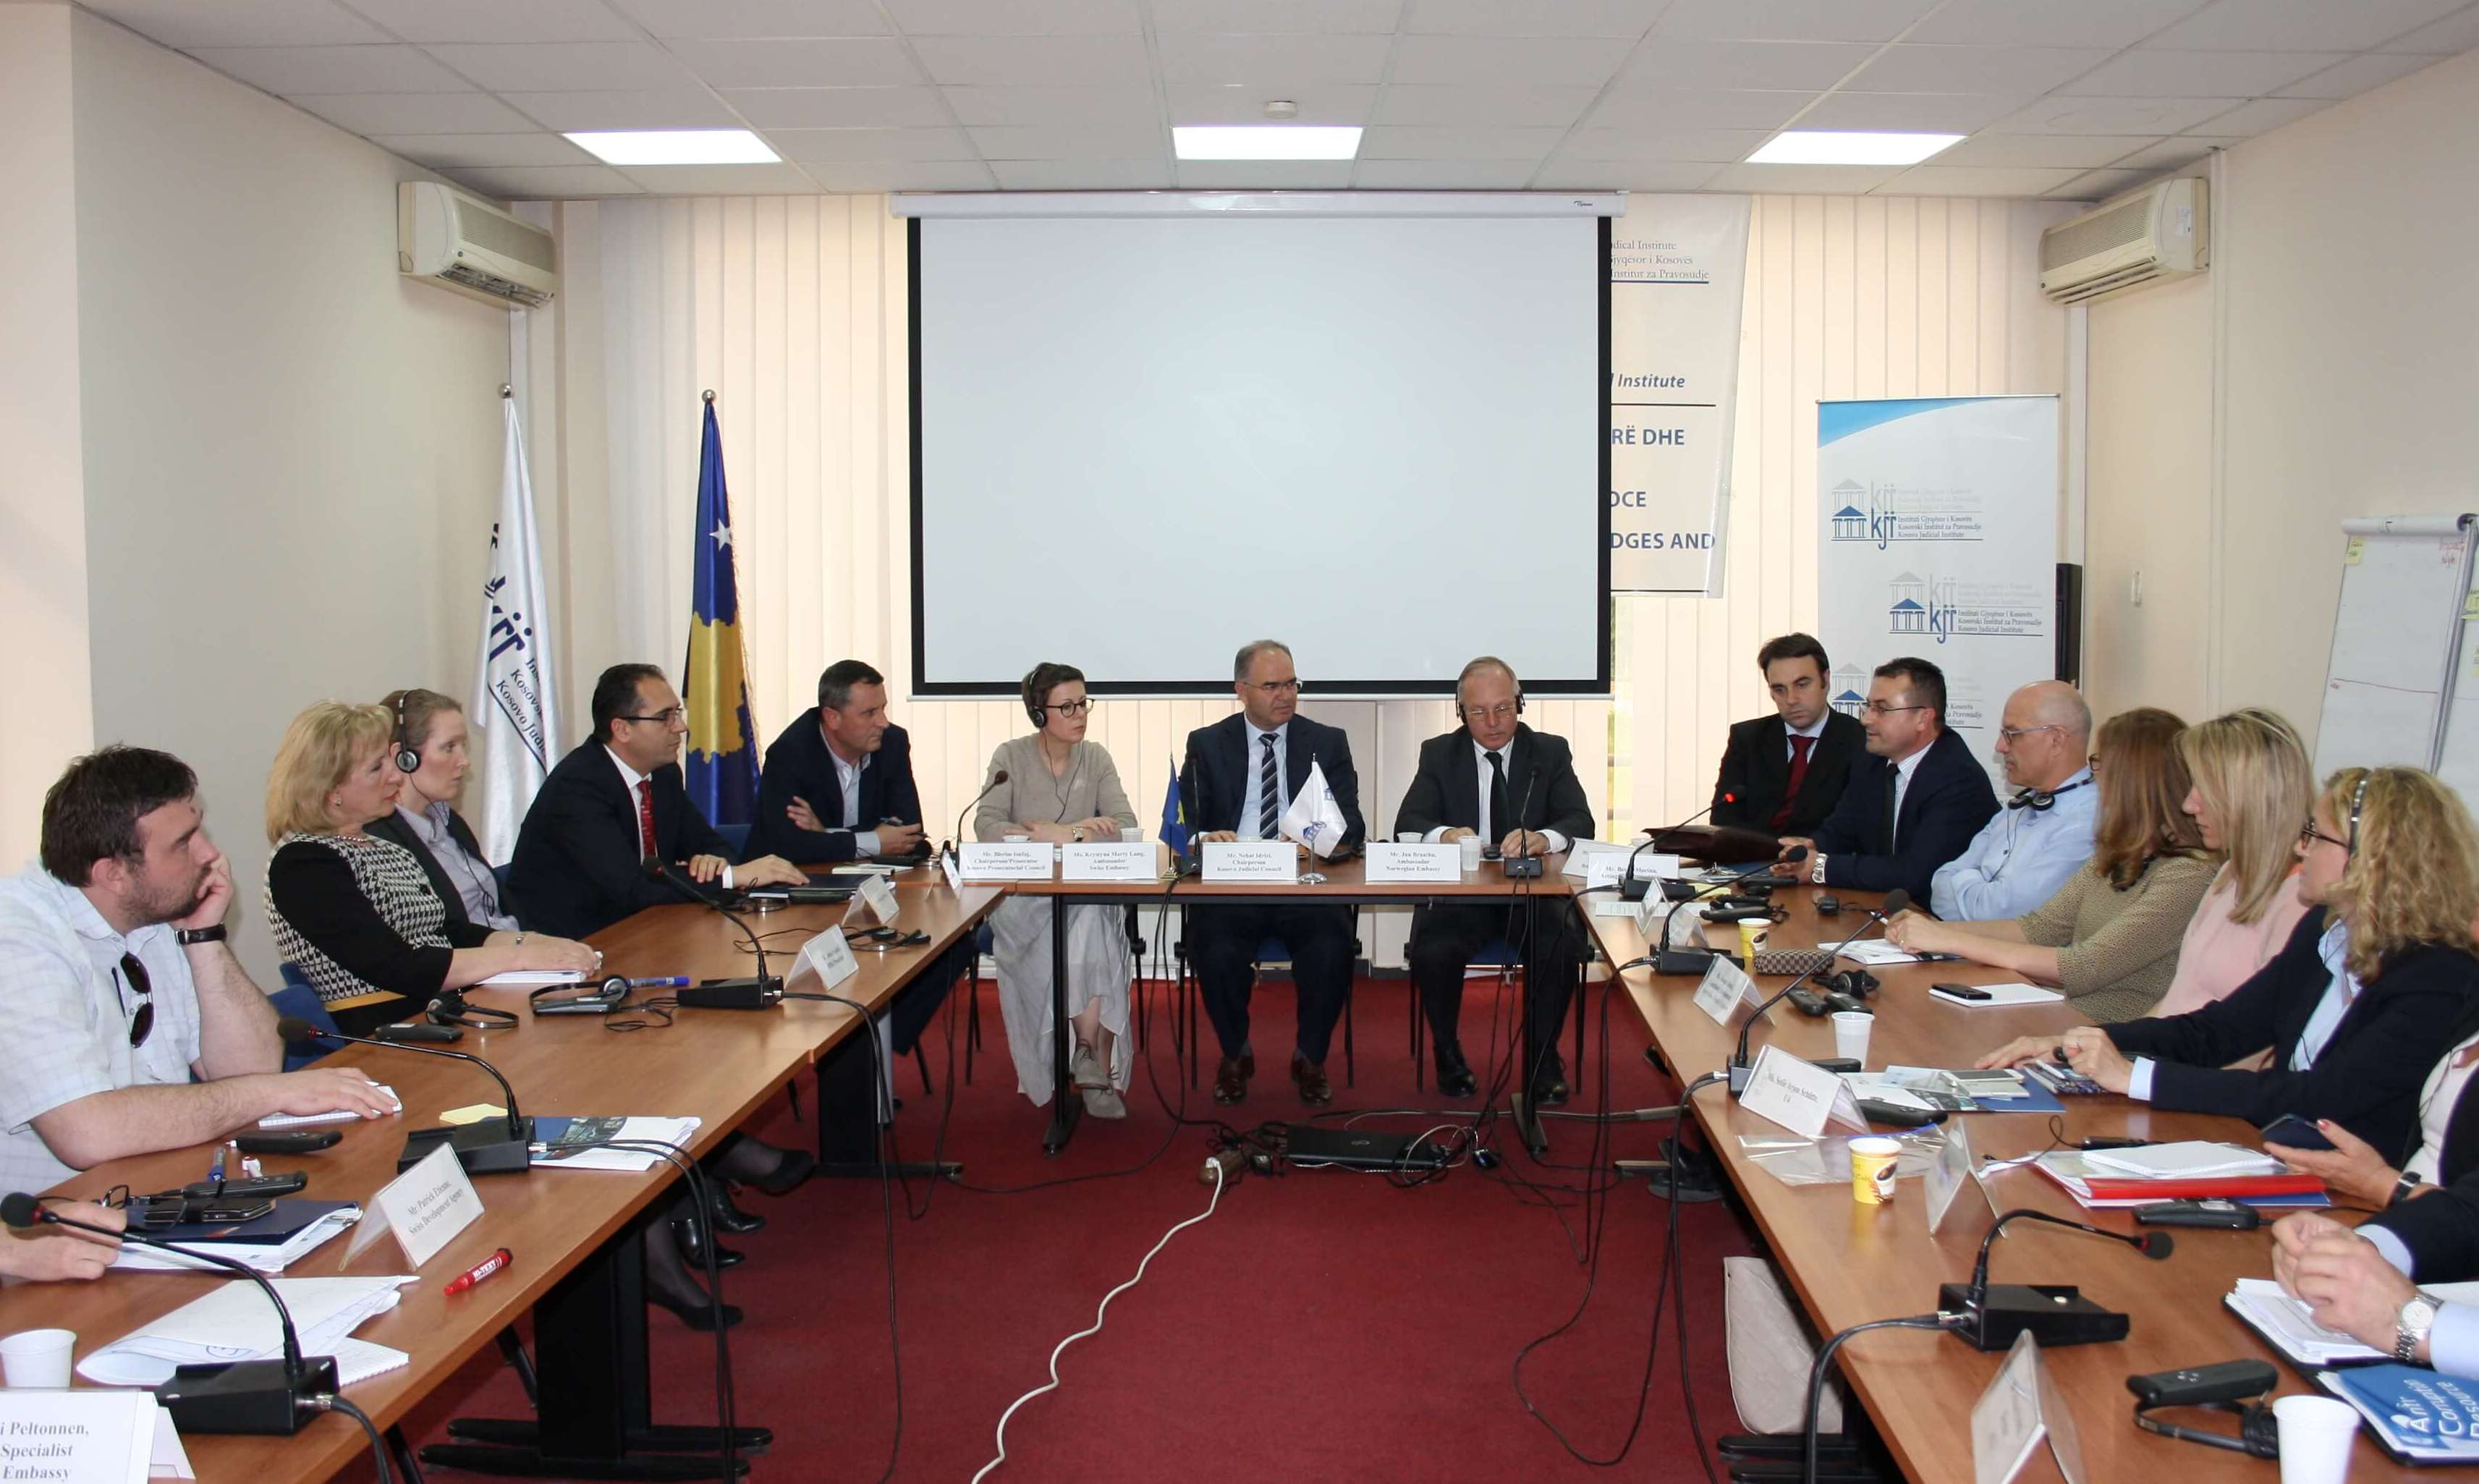 WORKSHOP STRENGHTENING THE ROLE OF THE KOSOVAR JUSTICE SECTOR IN FIGHTING CORRUPTION